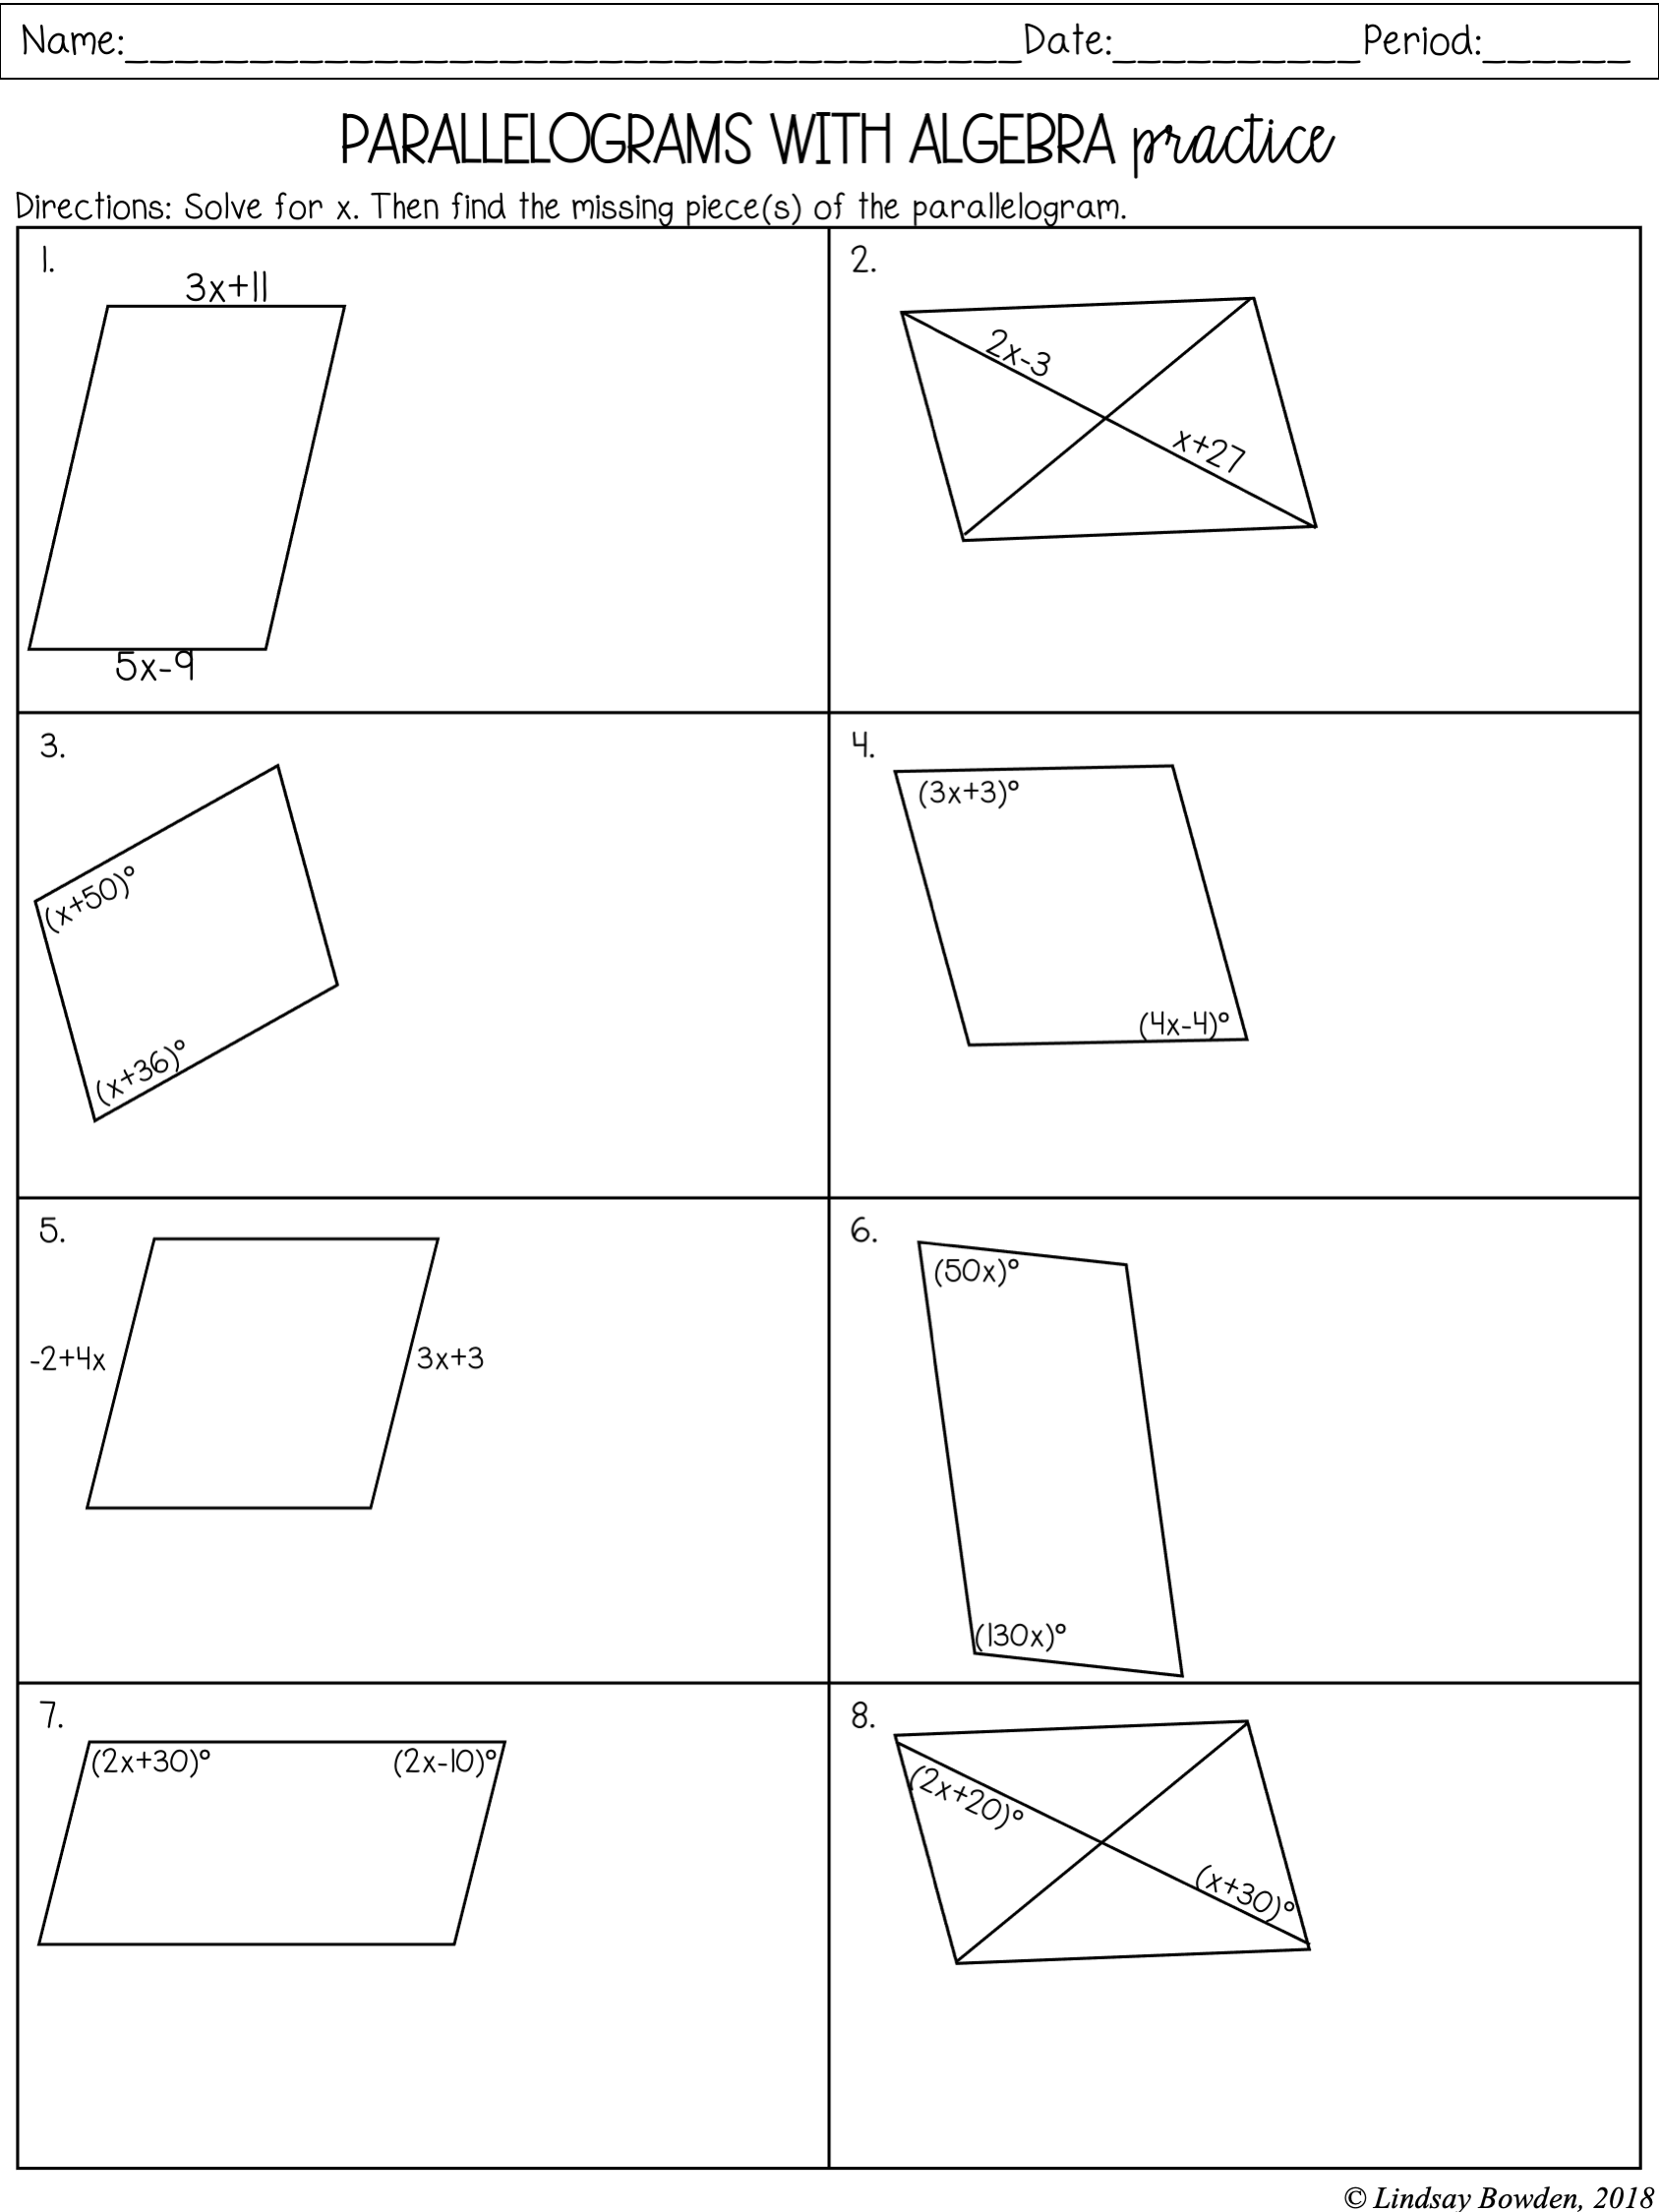 Parallelograms Notes and Worksheets - Lindsay Bowden Throughout Properties Of Parallelograms Worksheet